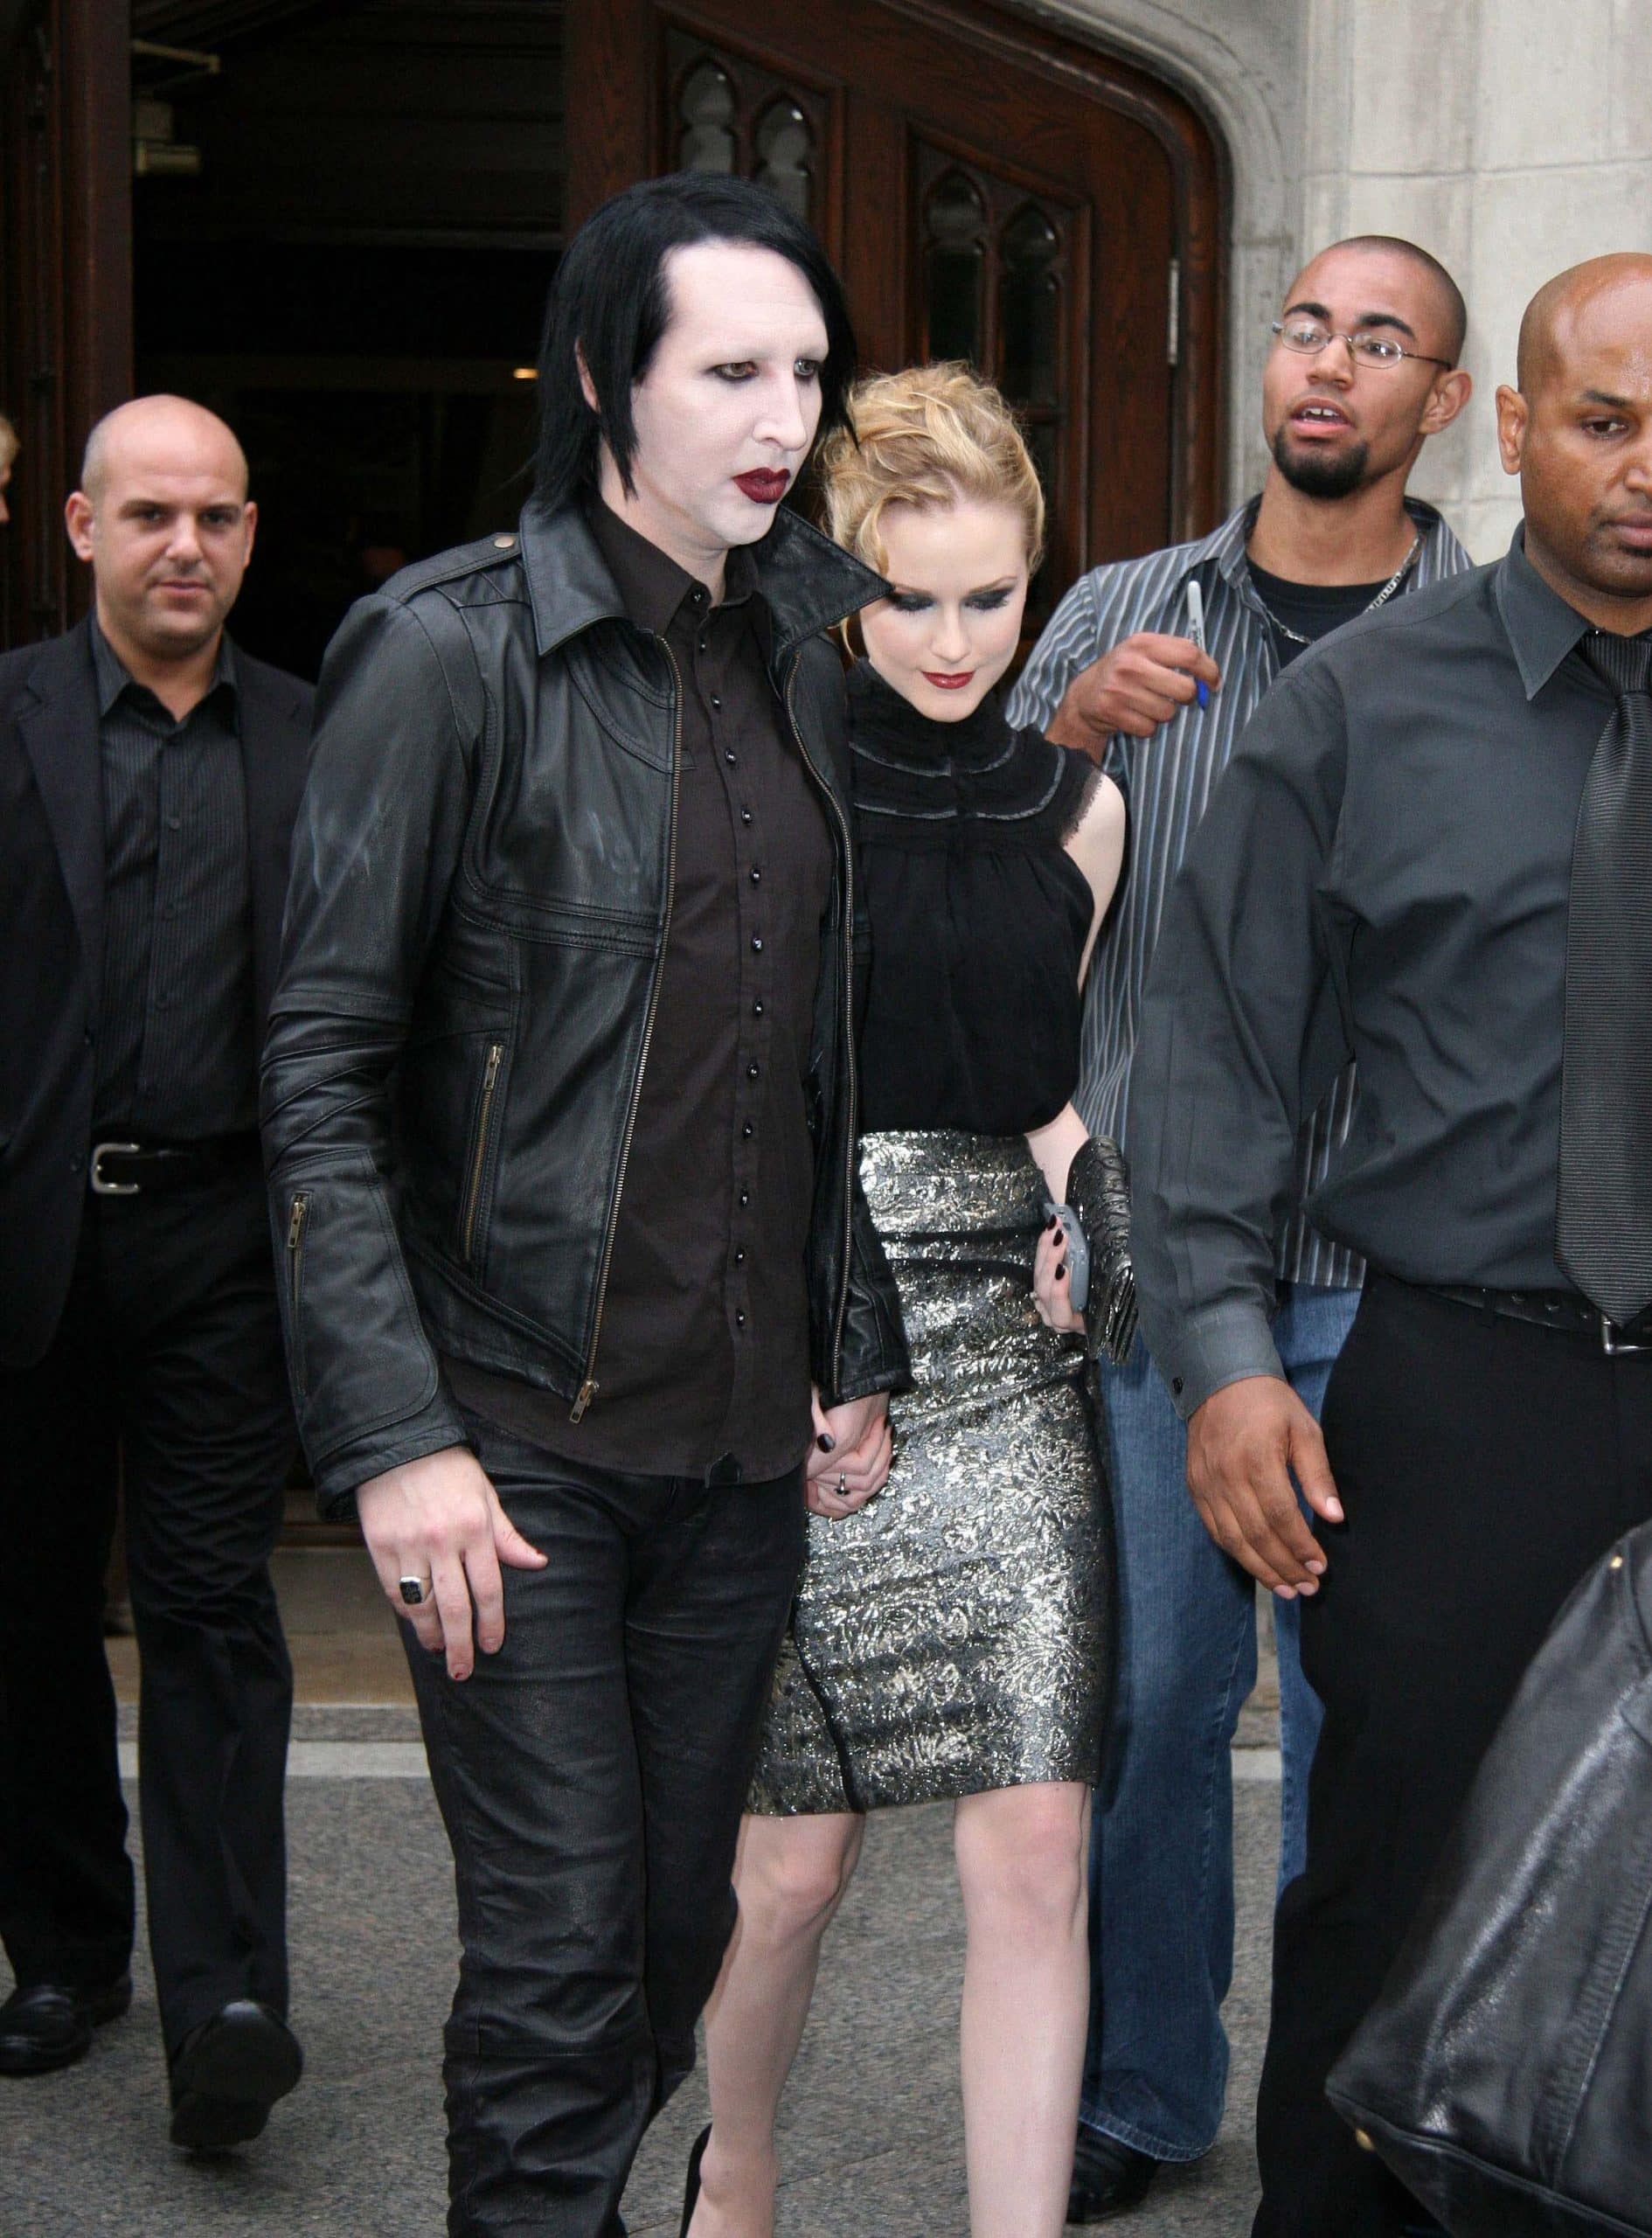 Marilyn Manson and Evan Rachel Wood were in a relationship from 2006 to 2010 and even got engaged